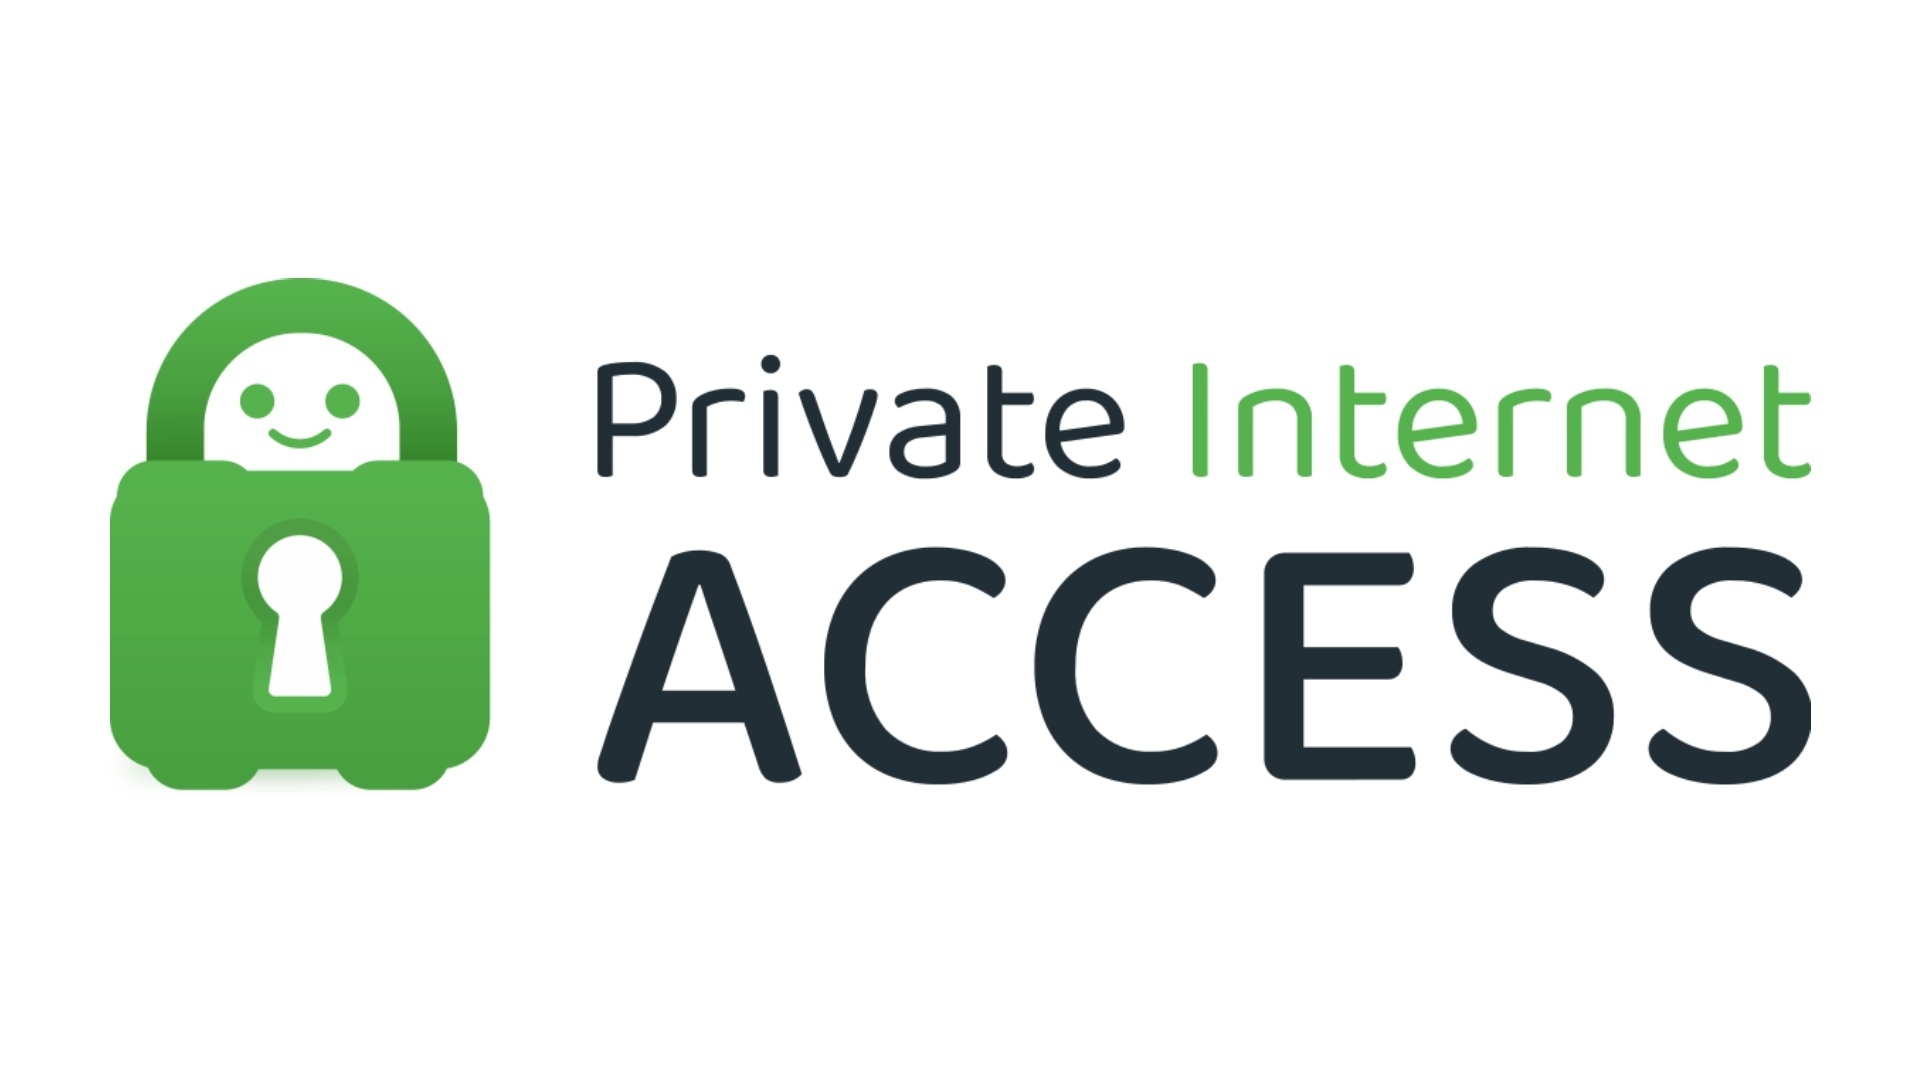 Best Apple TV VPN: Private Internet Access. Image shows the company logo.